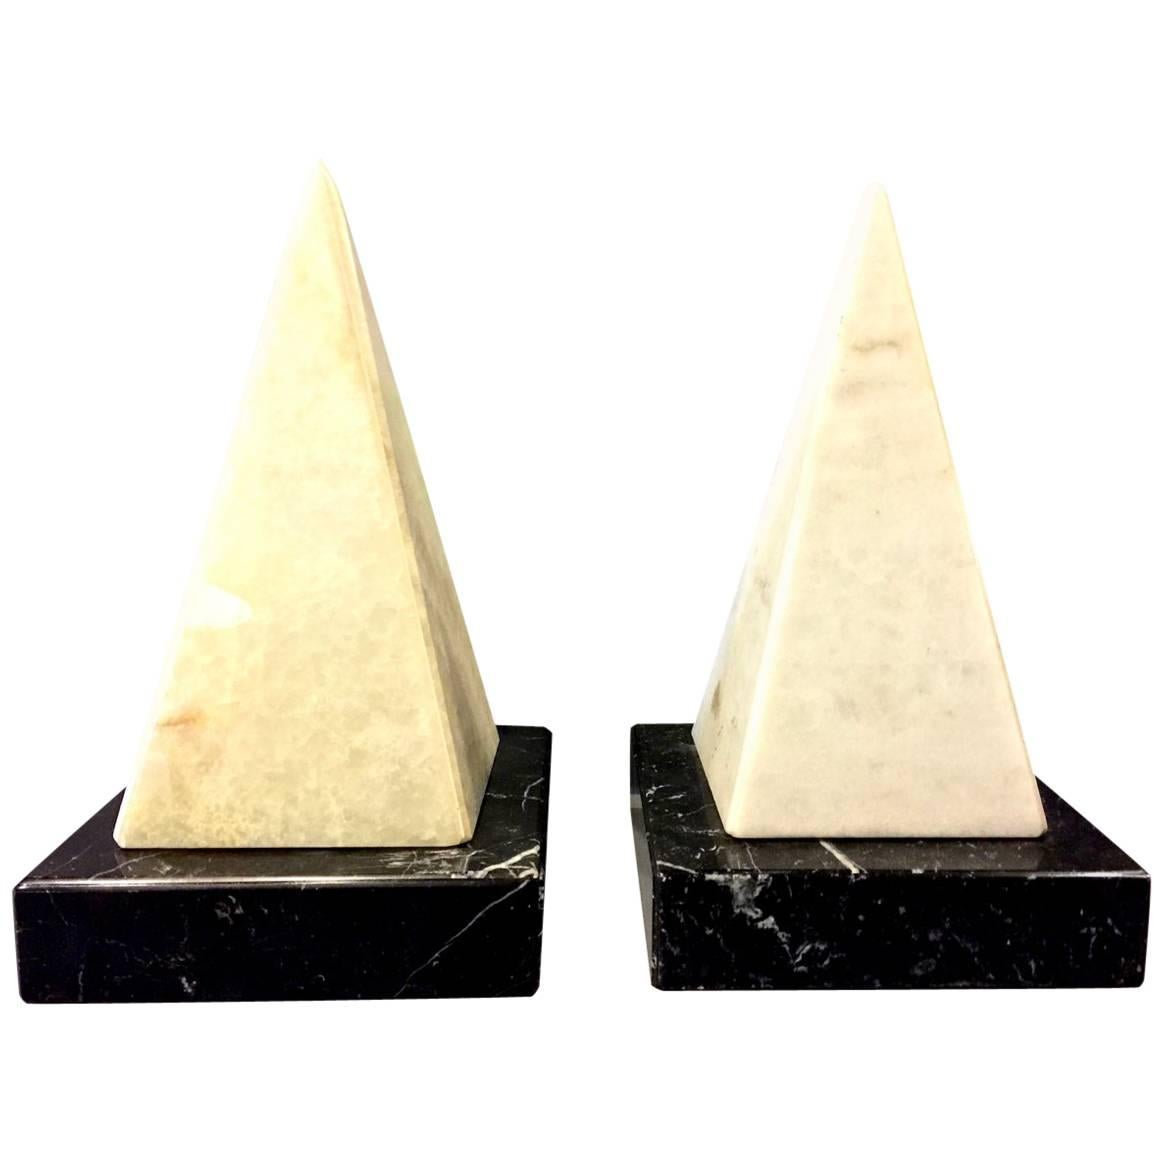 Pair of Mid-Century Alabaster and Marble Obelisk Lamps